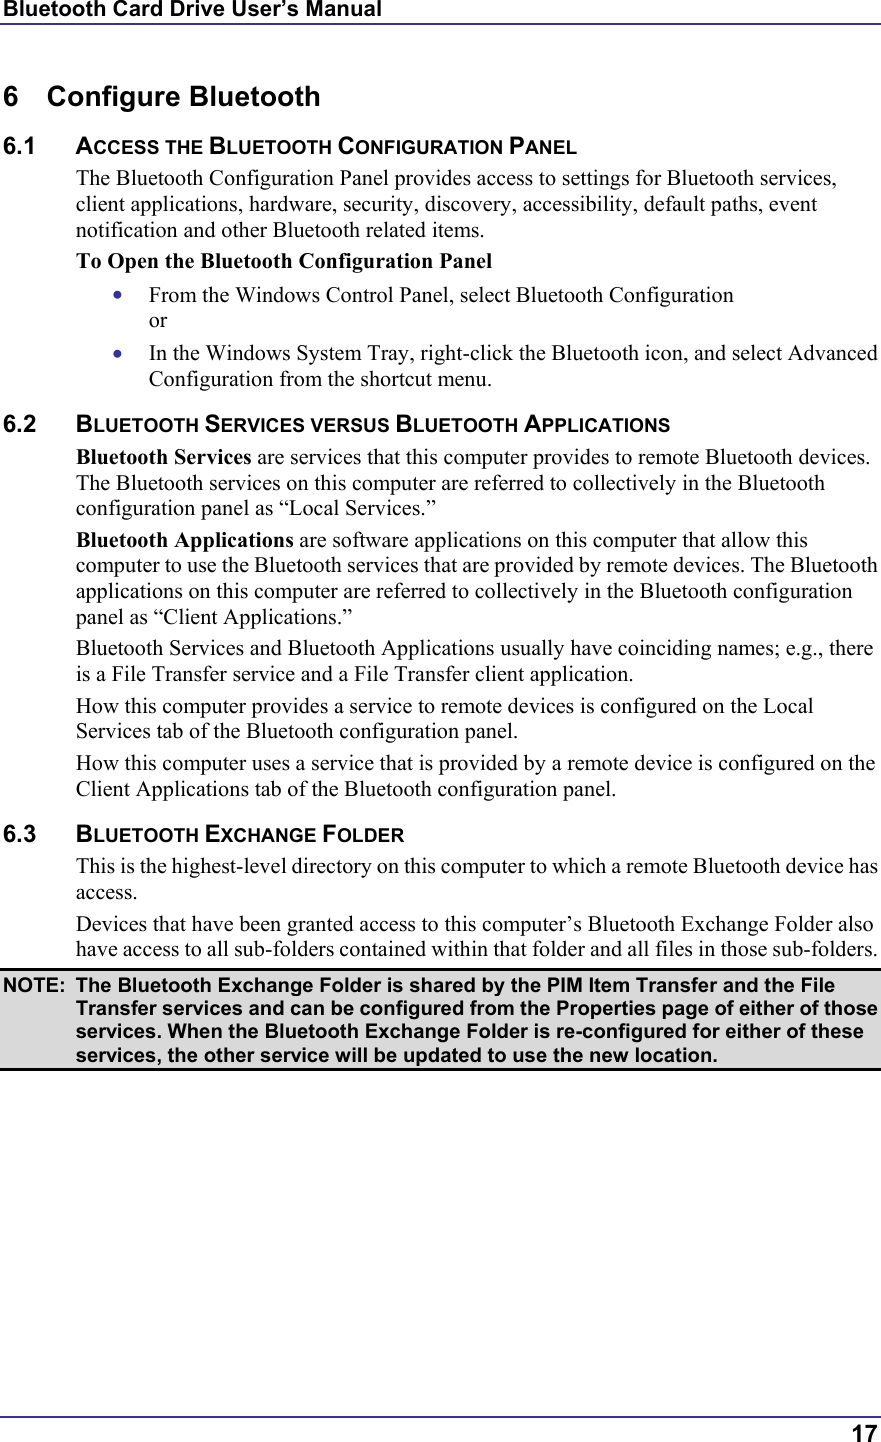 Bluetooth Card Drive User’s Manual  17 6 Configure Bluetooth 6.1 ACCESS THE BLUETOOTH CONFIGURATION PANEL The Bluetooth Configuration Panel provides access to settings for Bluetooth services, client applications, hardware, security, discovery, accessibility, default paths, event notification and other Bluetooth related items. To Open the Bluetooth Configuration Panel •  From the Windows Control Panel, select Bluetooth Configuration or •  In the Windows System Tray, right-click the Bluetooth icon, and select Advanced Configuration from the shortcut menu. 6.2 BLUETOOTH SERVICES VERSUS BLUETOOTH APPLICATIONS Bluetooth Services are services that this computer provides to remote Bluetooth devices. The Bluetooth services on this computer are referred to collectively in the Bluetooth configuration panel as “Local Services.” Bluetooth Applications are software applications on this computer that allow this computer to use the Bluetooth services that are provided by remote devices. The Bluetooth applications on this computer are referred to collectively in the Bluetooth configuration panel as “Client Applications.” Bluetooth Services and Bluetooth Applications usually have coinciding names; e.g., there is a File Transfer service and a File Transfer client application. How this computer provides a service to remote devices is configured on the Local Services tab of the Bluetooth configuration panel. How this computer uses a service that is provided by a remote device is configured on the Client Applications tab of the Bluetooth configuration panel. 6.3 BLUETOOTH EXCHANGE FOLDER This is the highest-level directory on this computer to which a remote Bluetooth device has access. Devices that have been granted access to this computer’s Bluetooth Exchange Folder also have access to all sub-folders contained within that folder and all files in those sub-folders. NOTE:  The Bluetooth Exchange Folder is shared by the PIM Item Transfer and the File Transfer services and can be configured from the Properties page of either of those services. When the Bluetooth Exchange Folder is re-configured for either of these services, the other service will be updated to use the new location. 